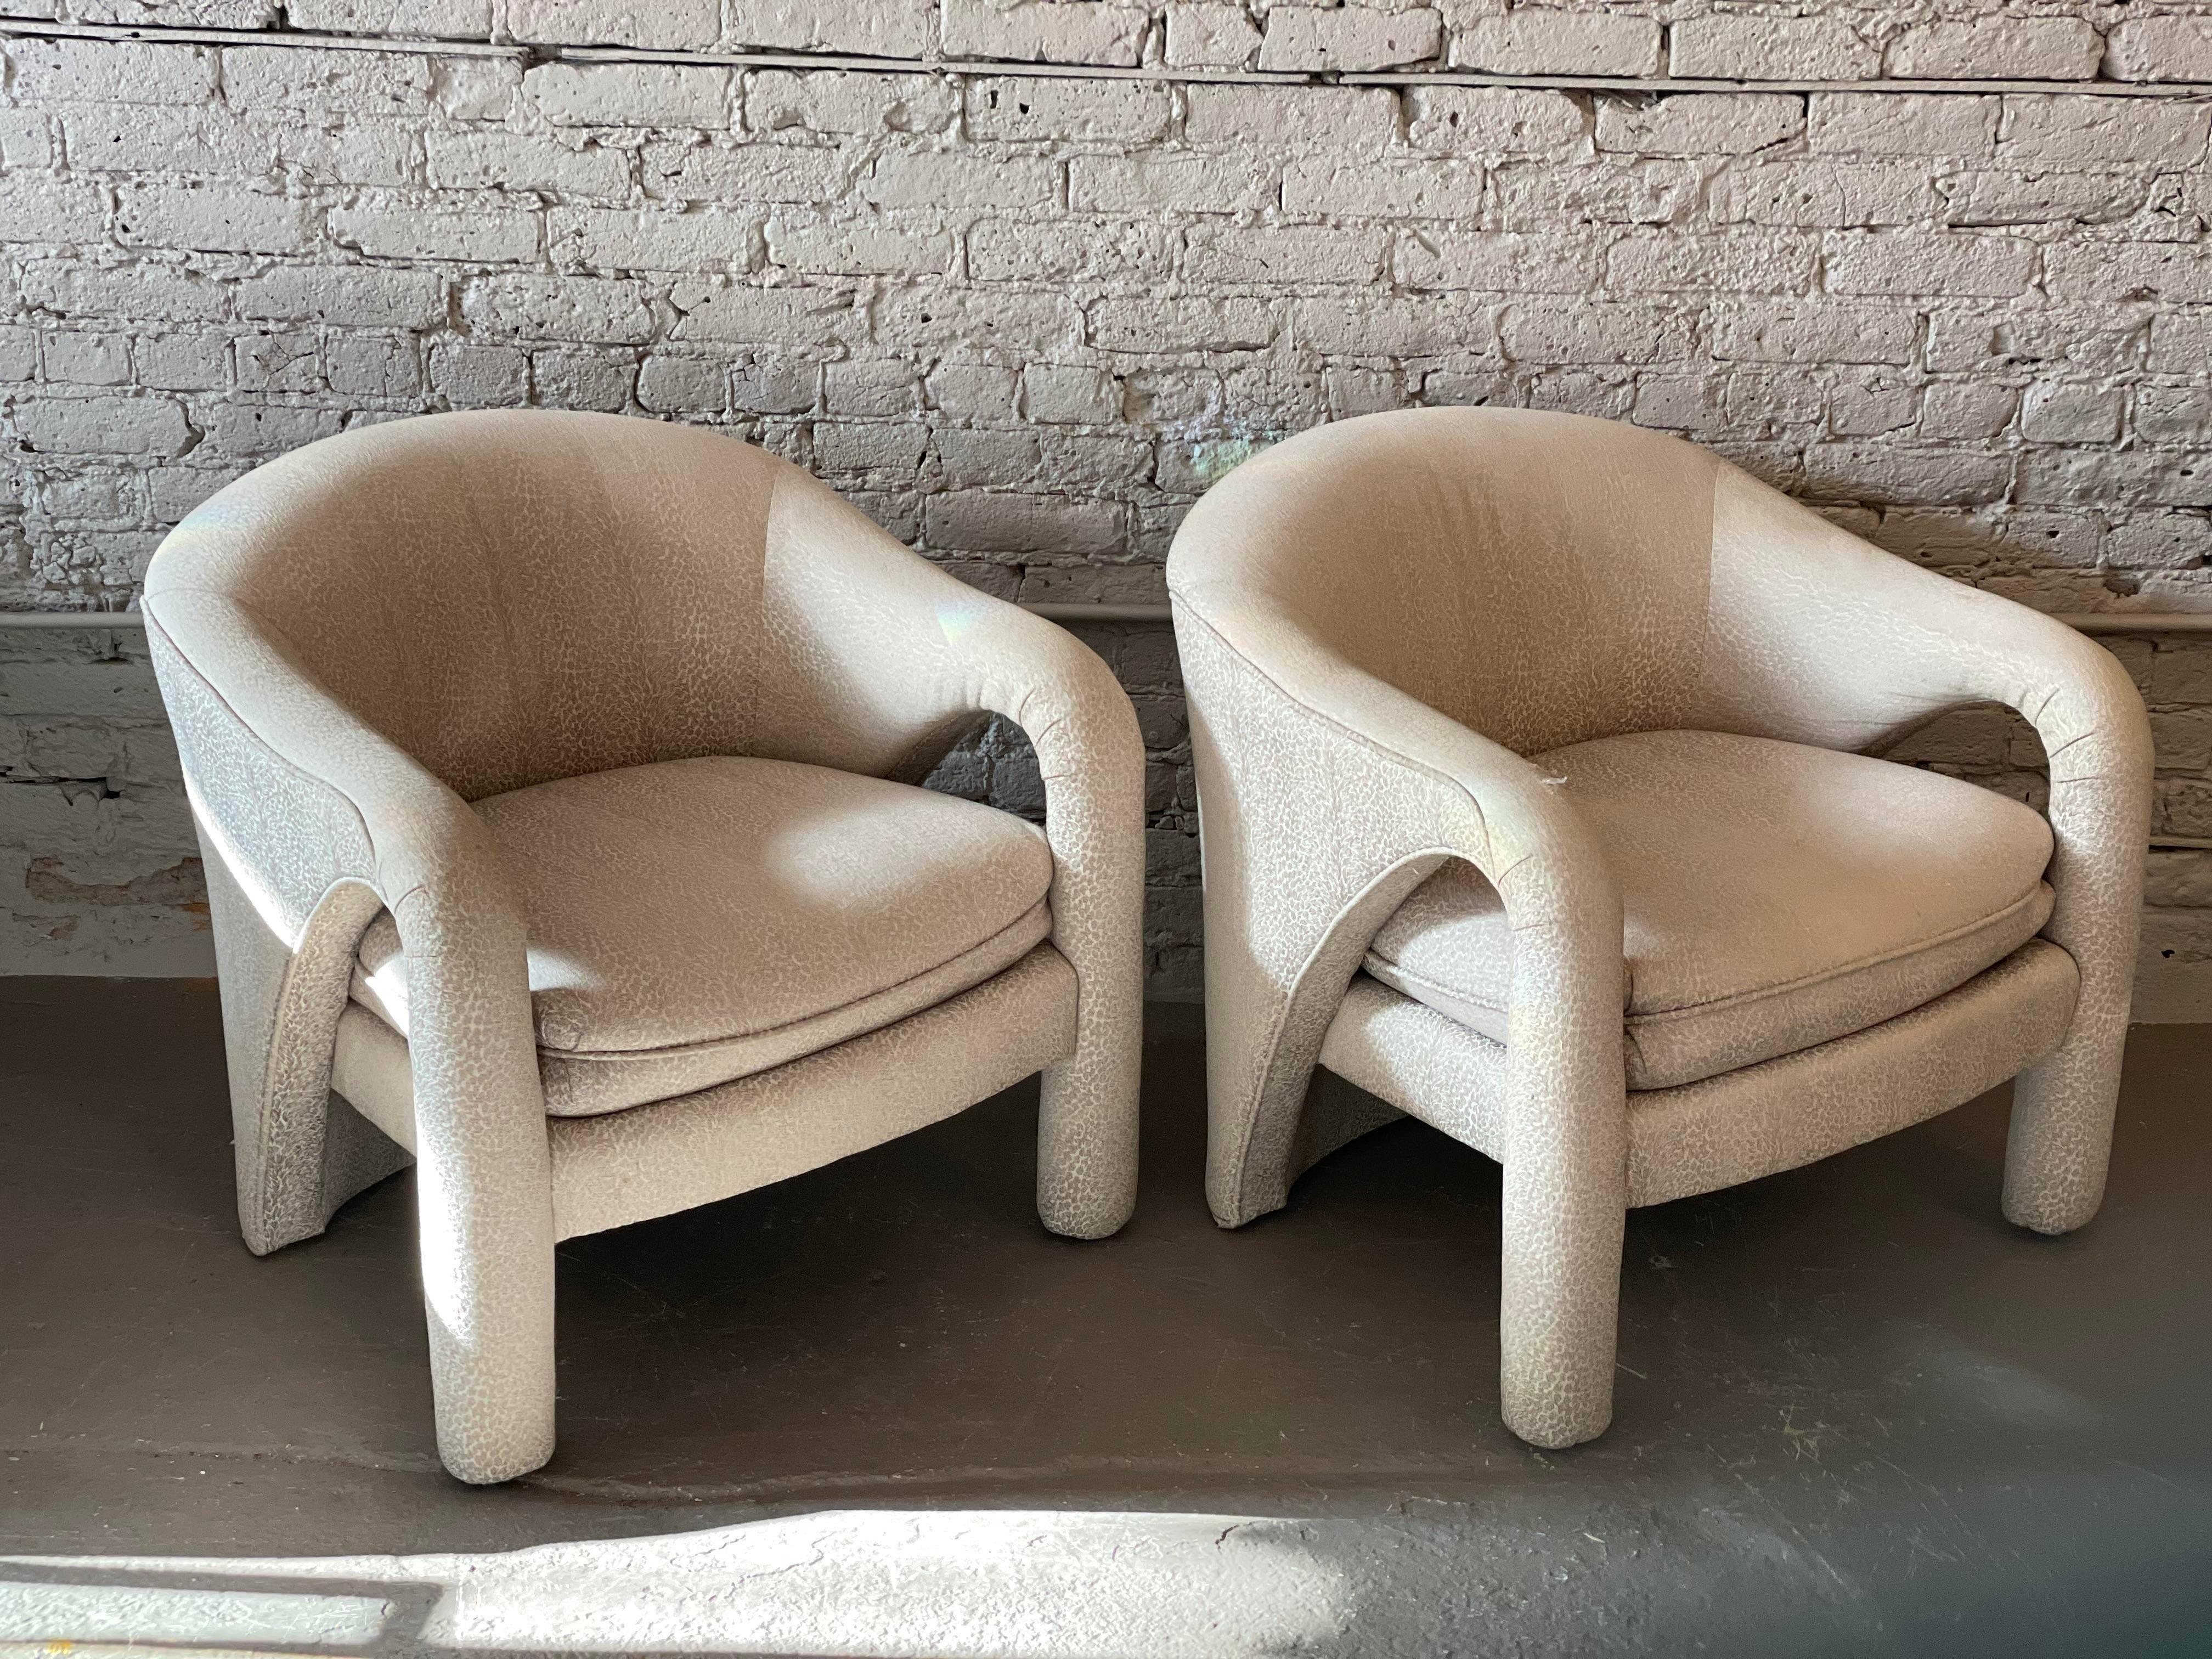 Textile 1980s Postmodern Sculptural Arc Chairs in Beige Upholstery, a Pair For Sale